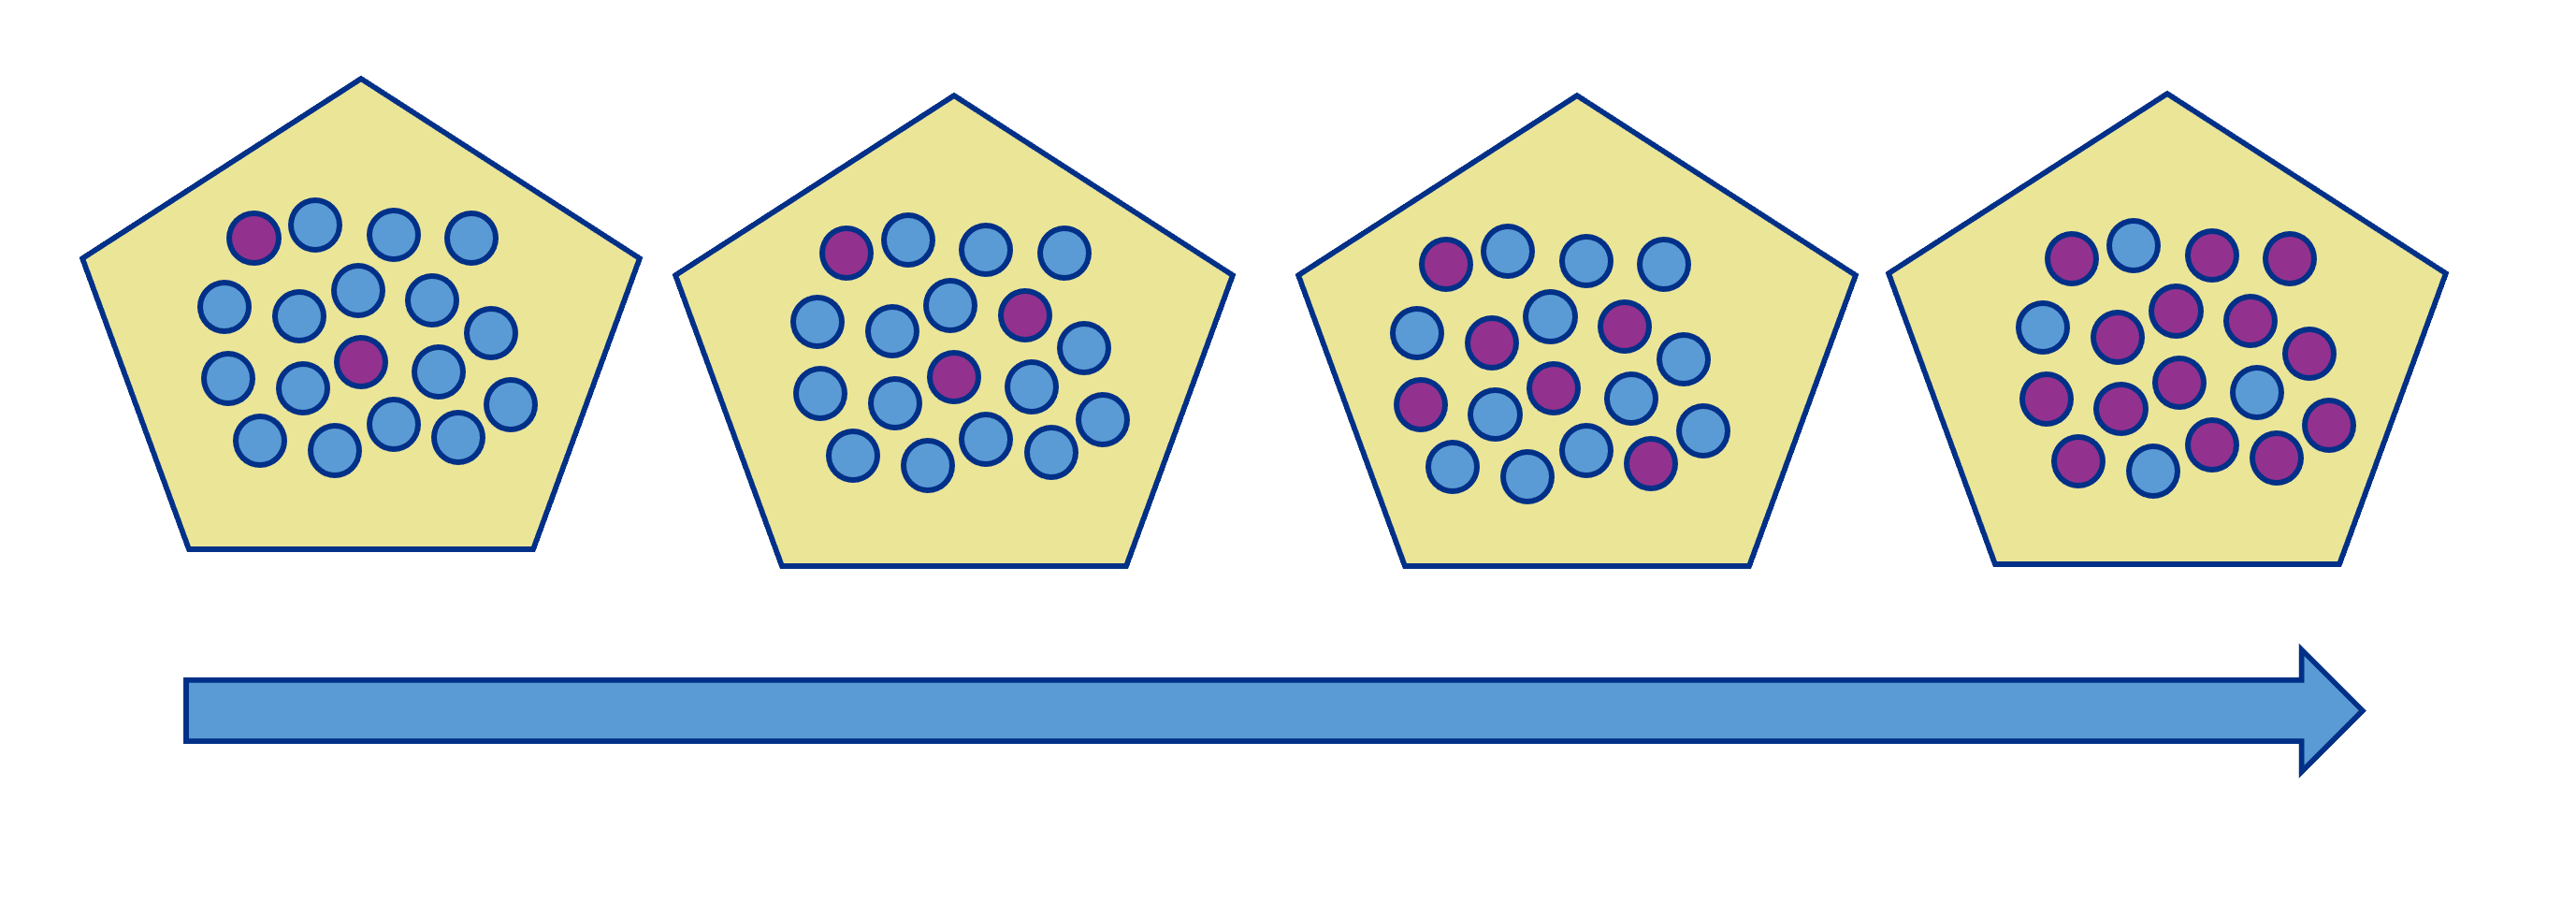 A colored illistration showing progressively more purple dots amongst blue dots, signifying developing resistance.